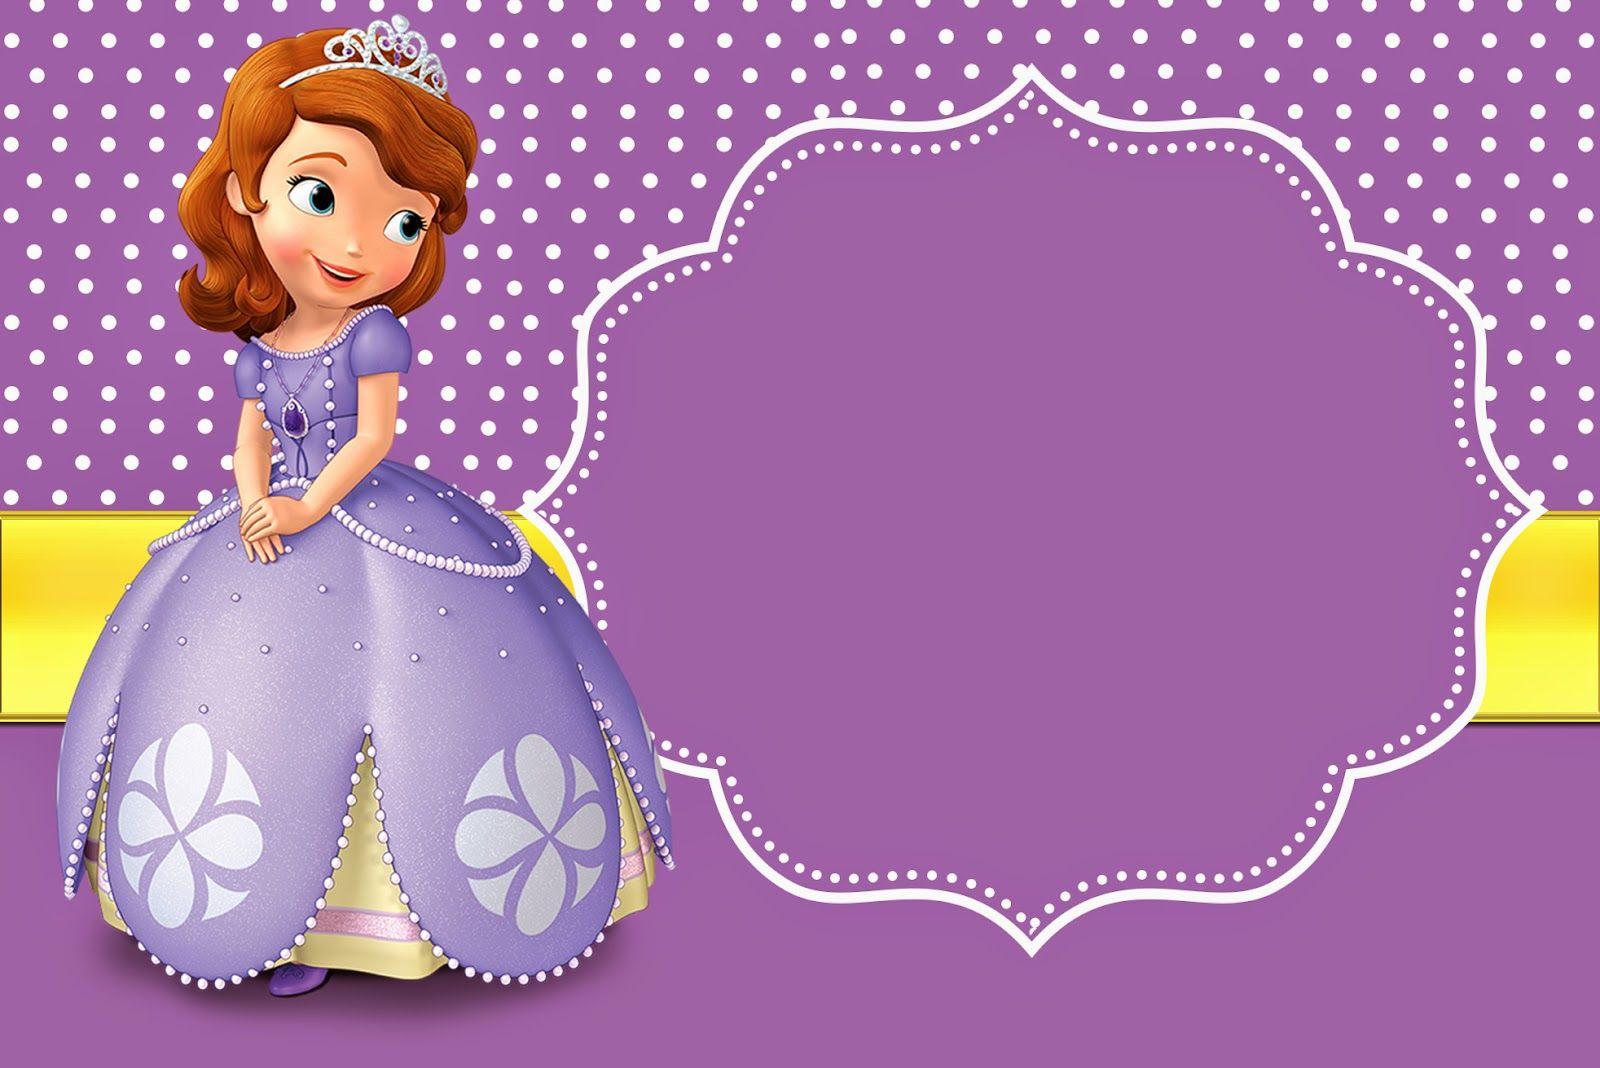 sofia the first wallpaper background 11. Background Check All